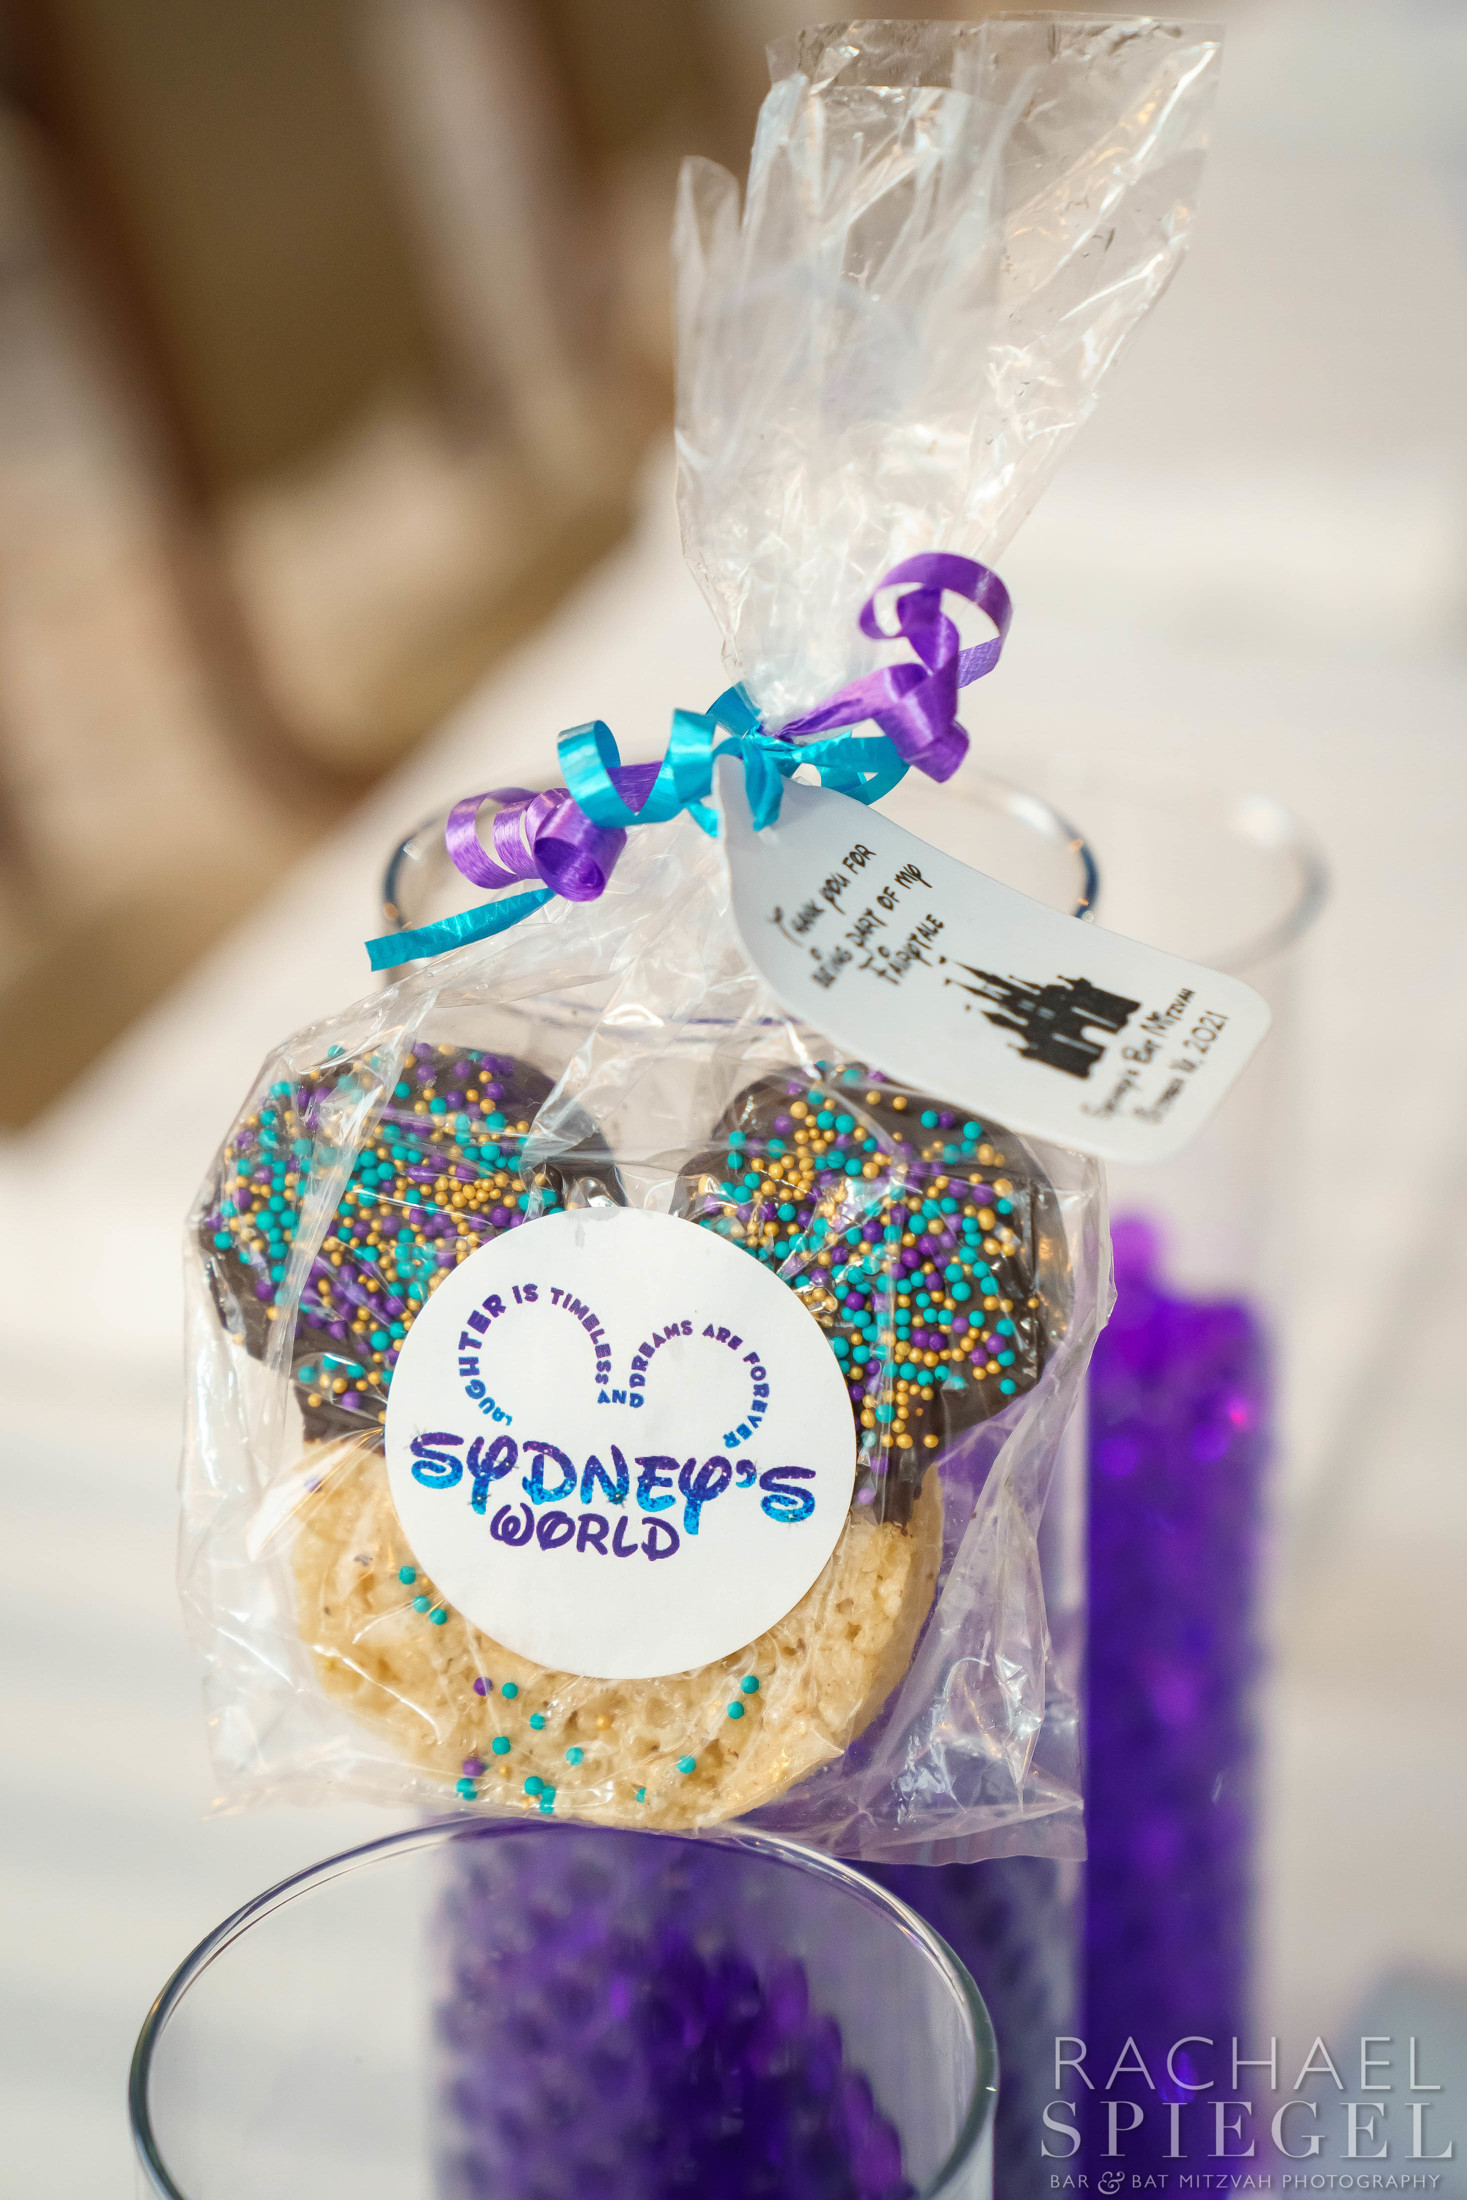 Rice Krispie treat favors | Pop Color Events | Adding a Pop of Color to Bar & Bat Mitzvahs in DC, MD & VA | Photo by: Rachael Spiegel Photography